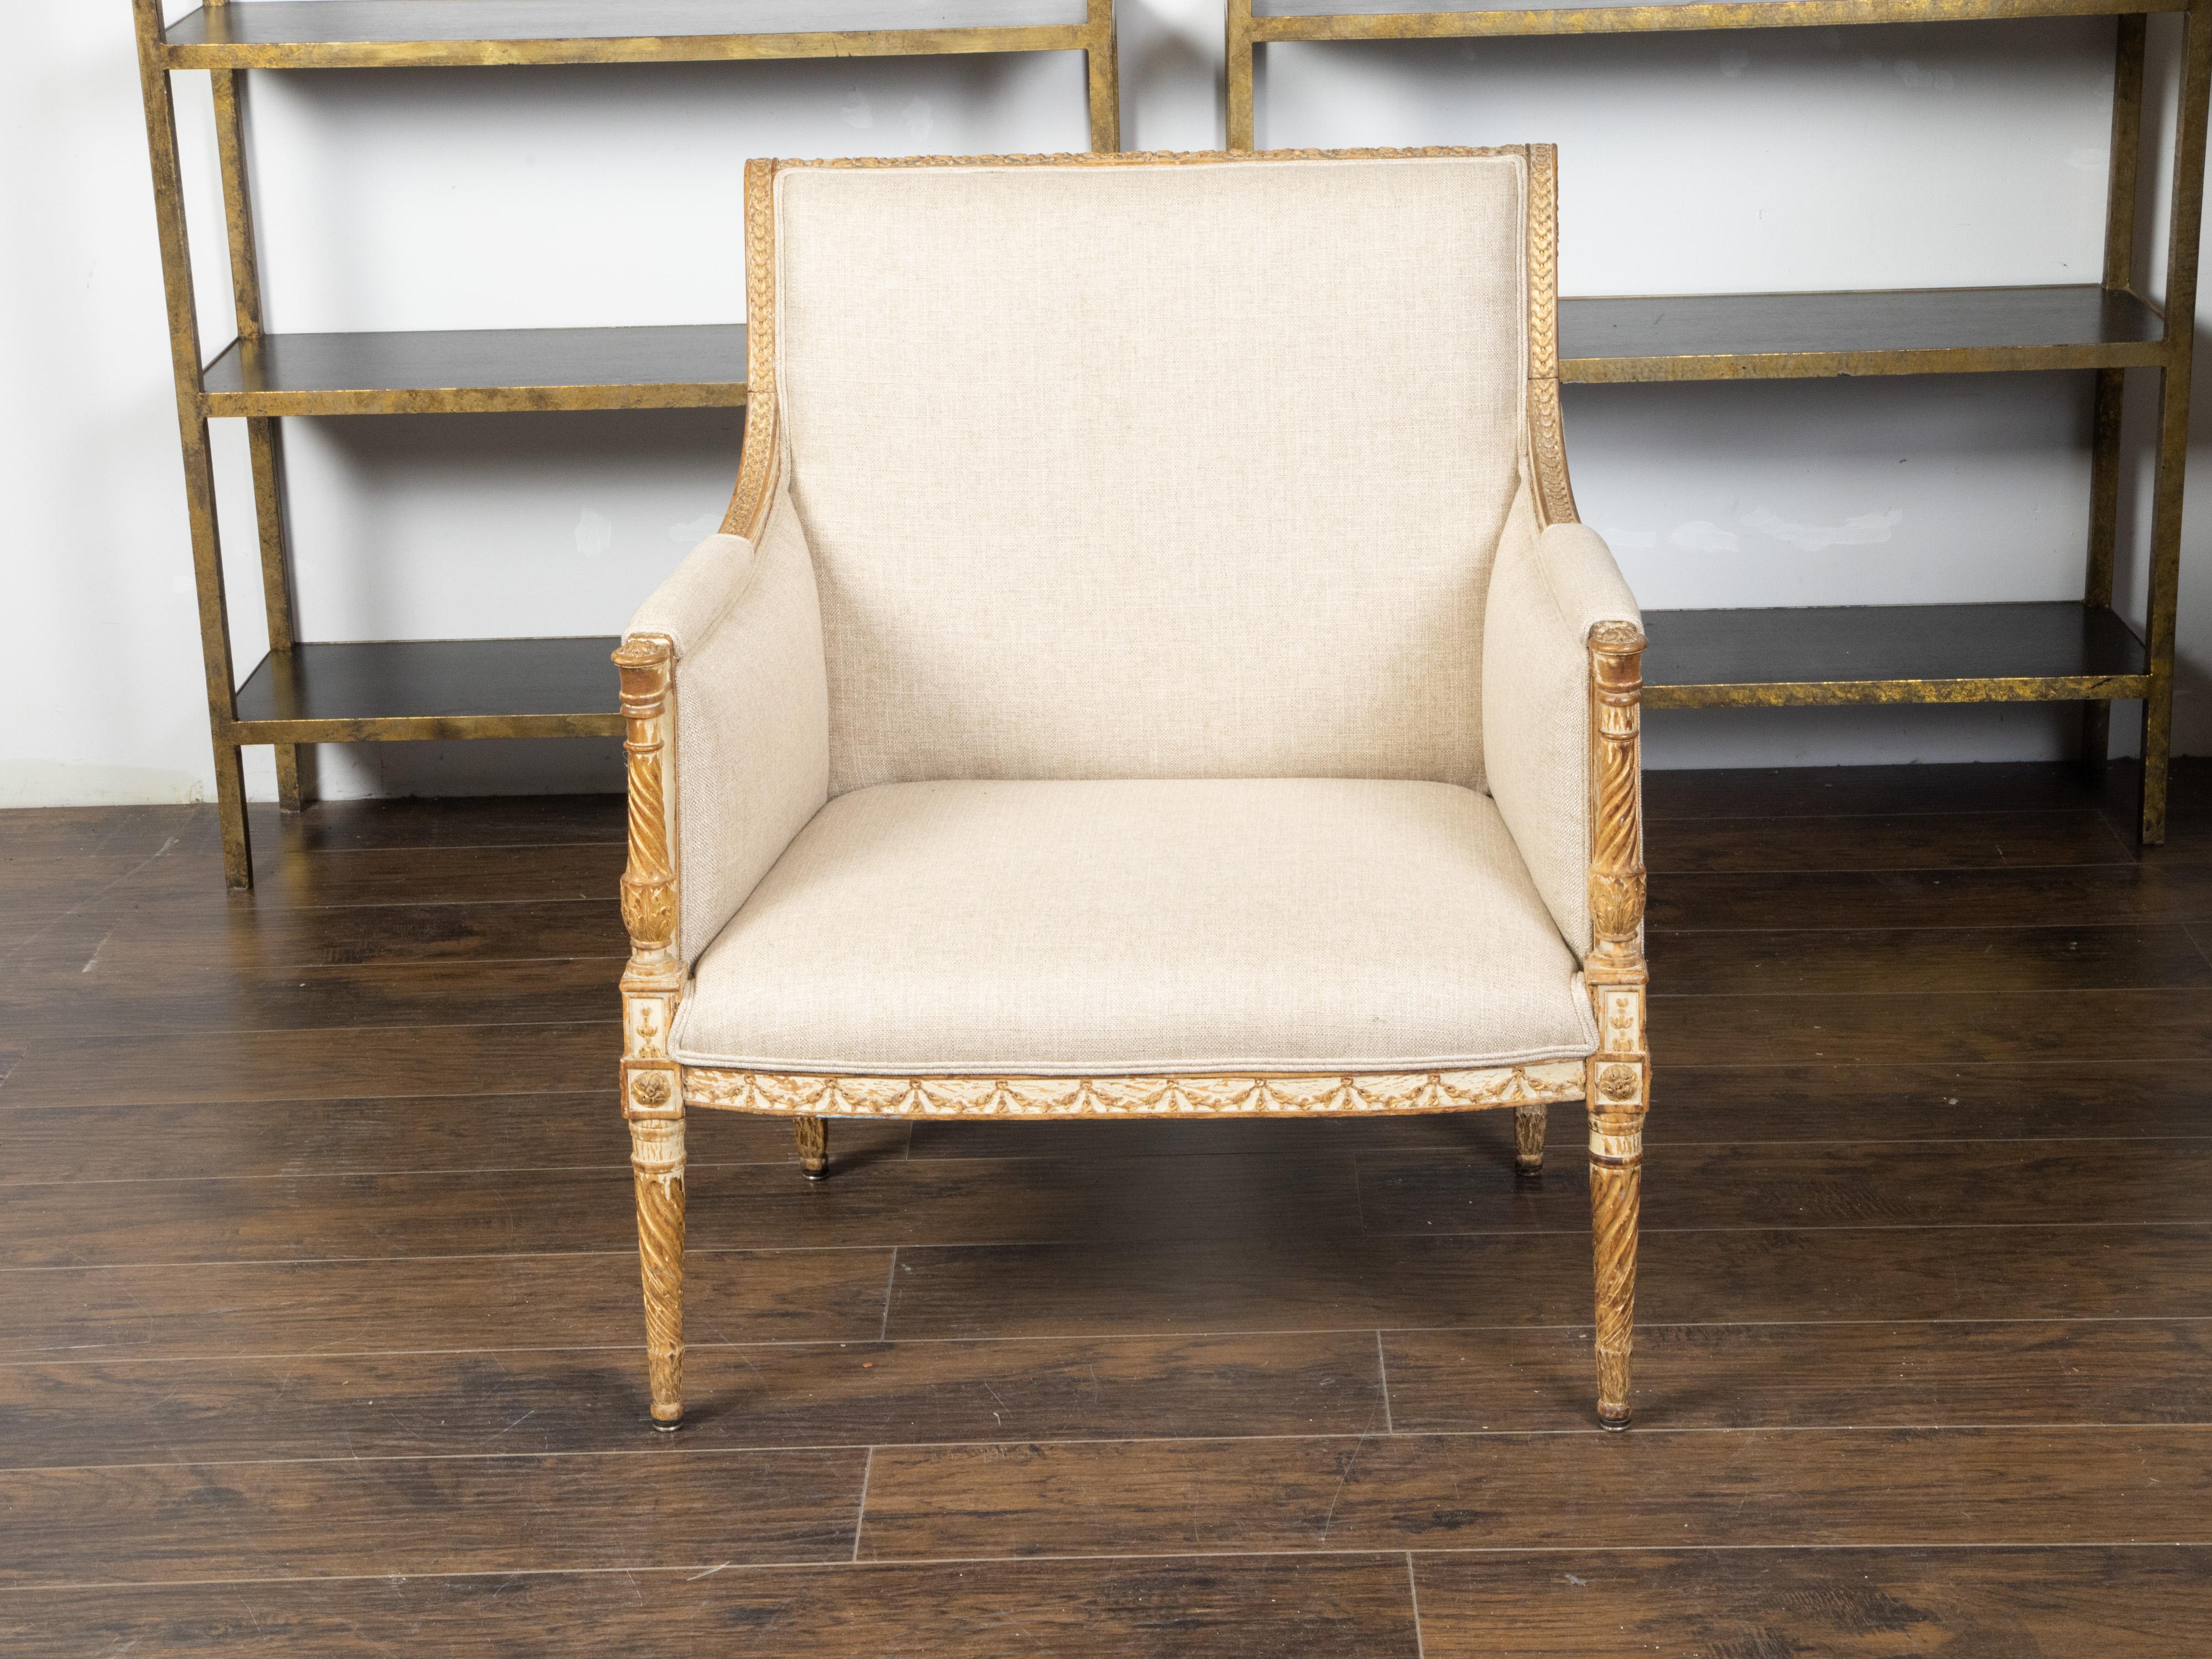 A French Directoire style painted and gilt wood bergère chair from the 19th century, with out-scrolling back, carved motifs and new upholstery. Created in France during the 19th century, this Directoire style bergère features a delicately